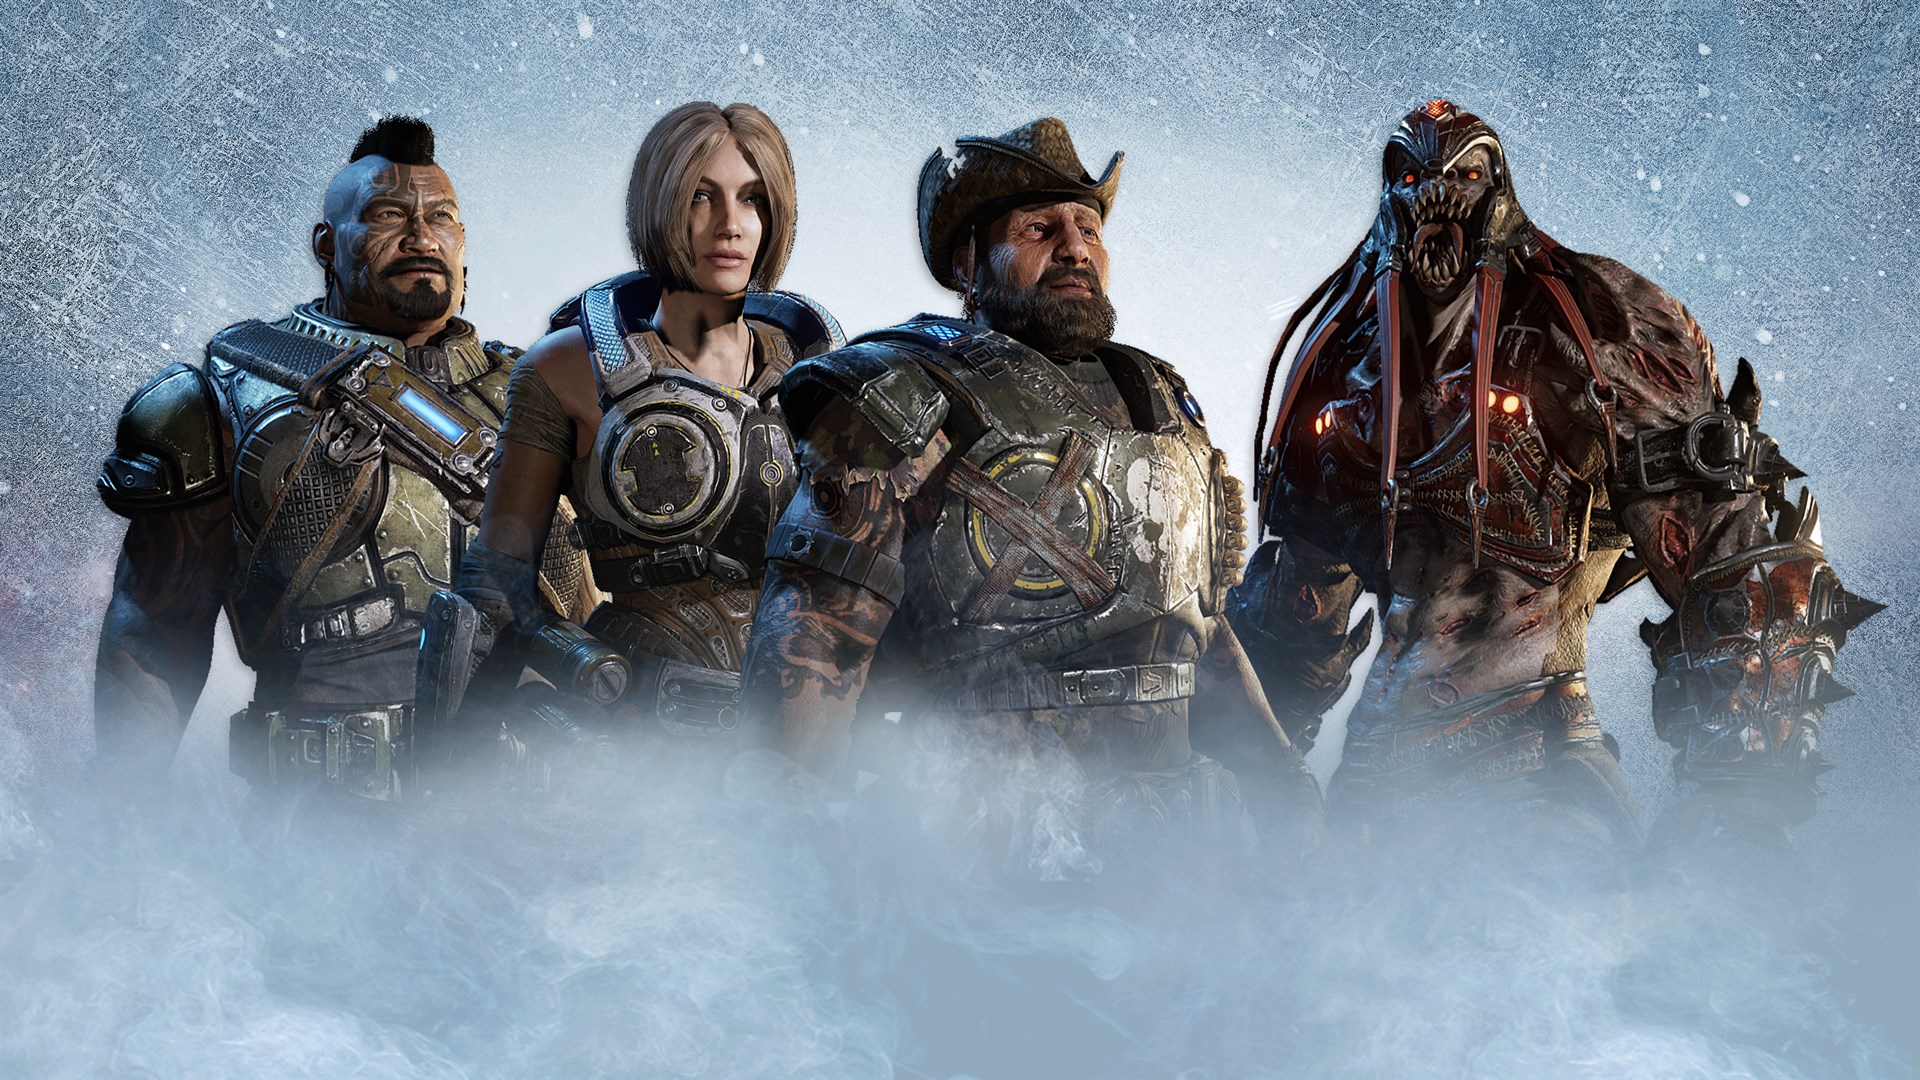 Gears 5: Multiplayer Relaunches Today with Operation 5: Hollow